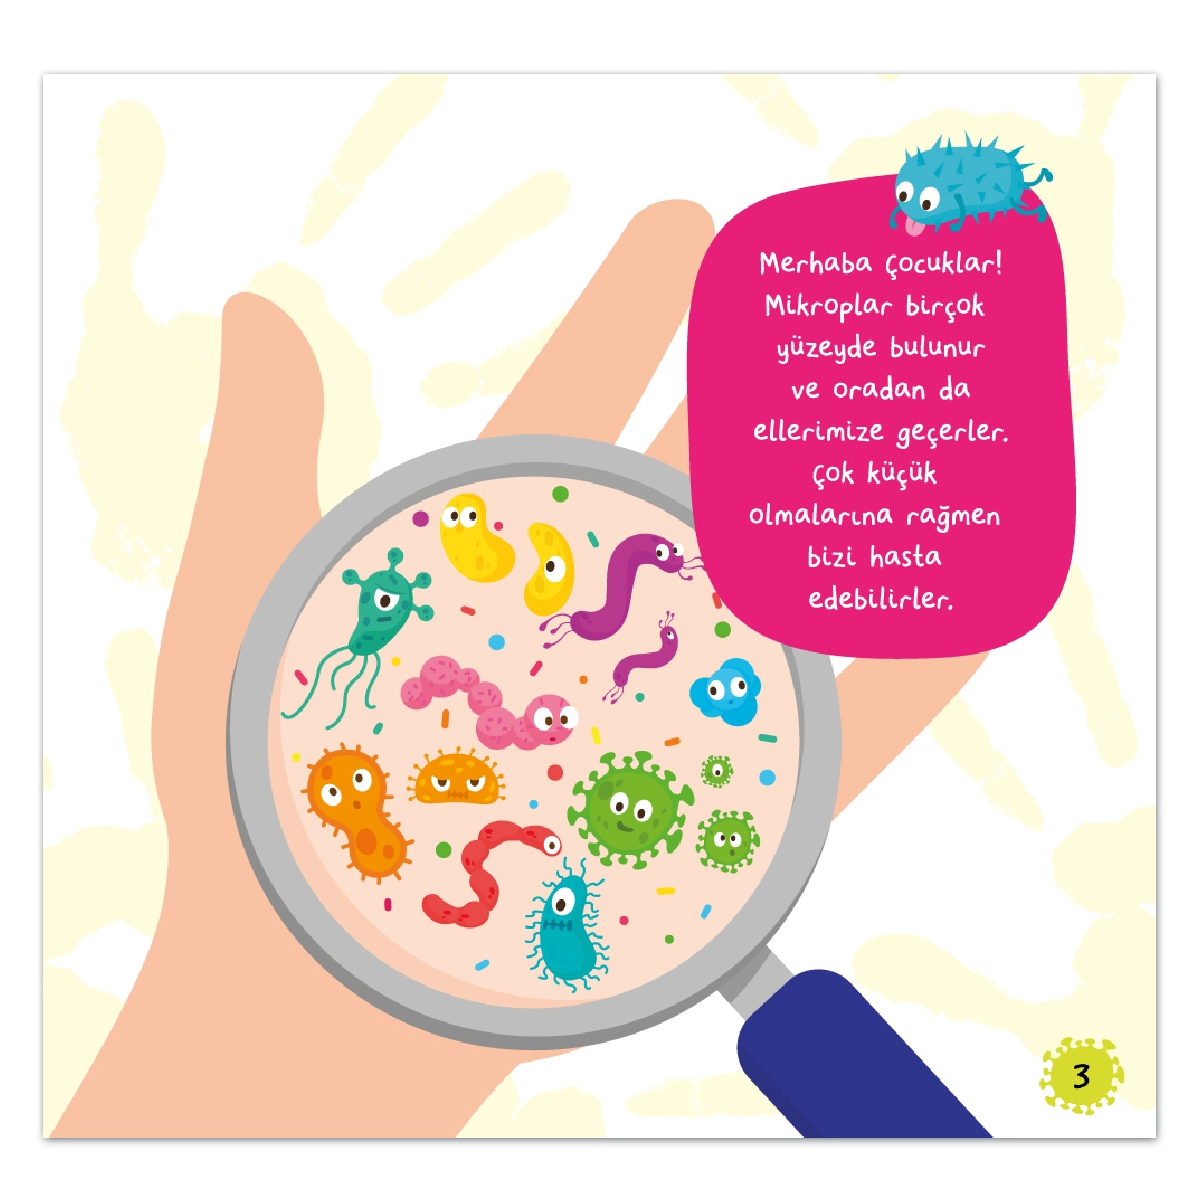 We Can Stop the Spread of Germs 